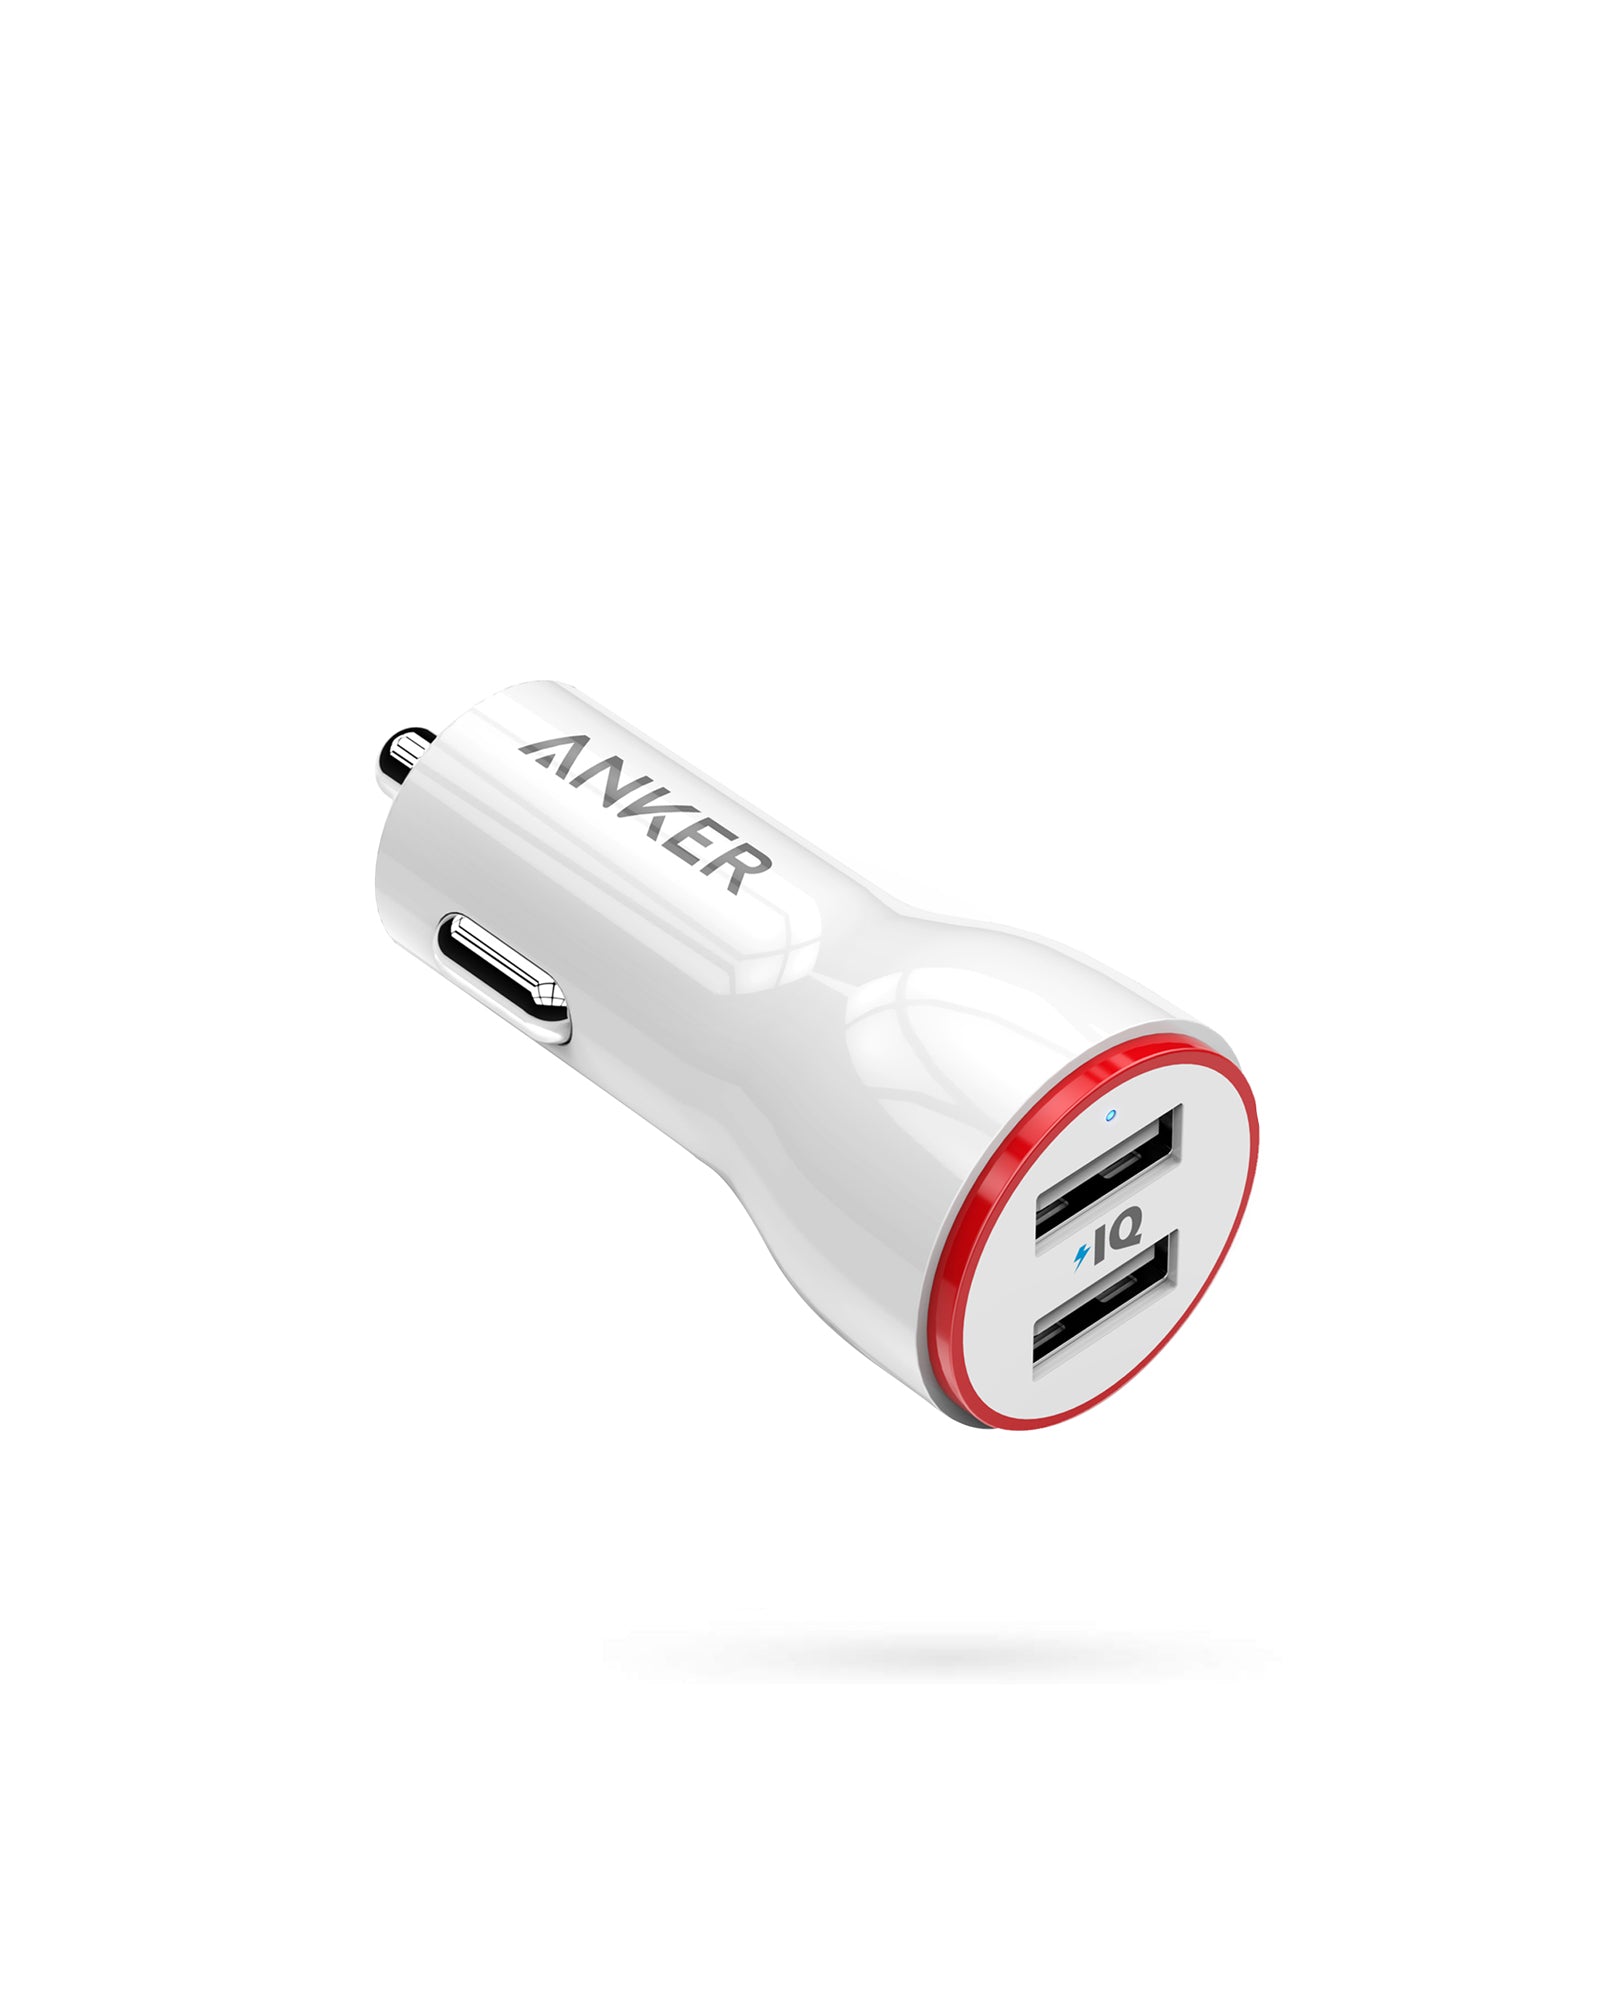 Anker 24W Dual USB Car Charger, Powerdrive 2 for iPhone X/8/7/6s/Plus